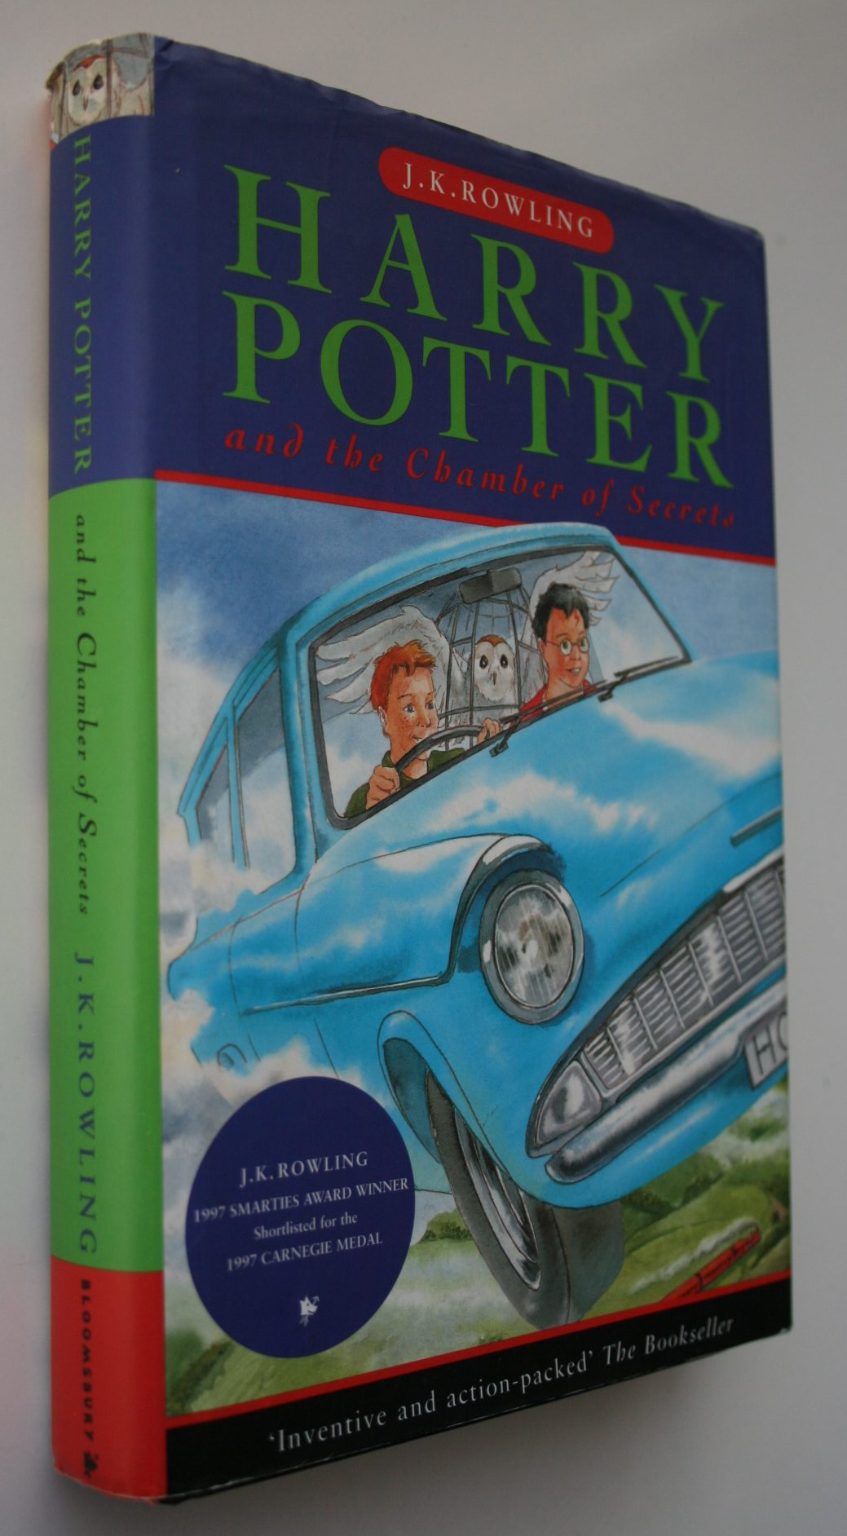 Harry Potter and the Chamber of Secrets. First Australian Ed , first printing.